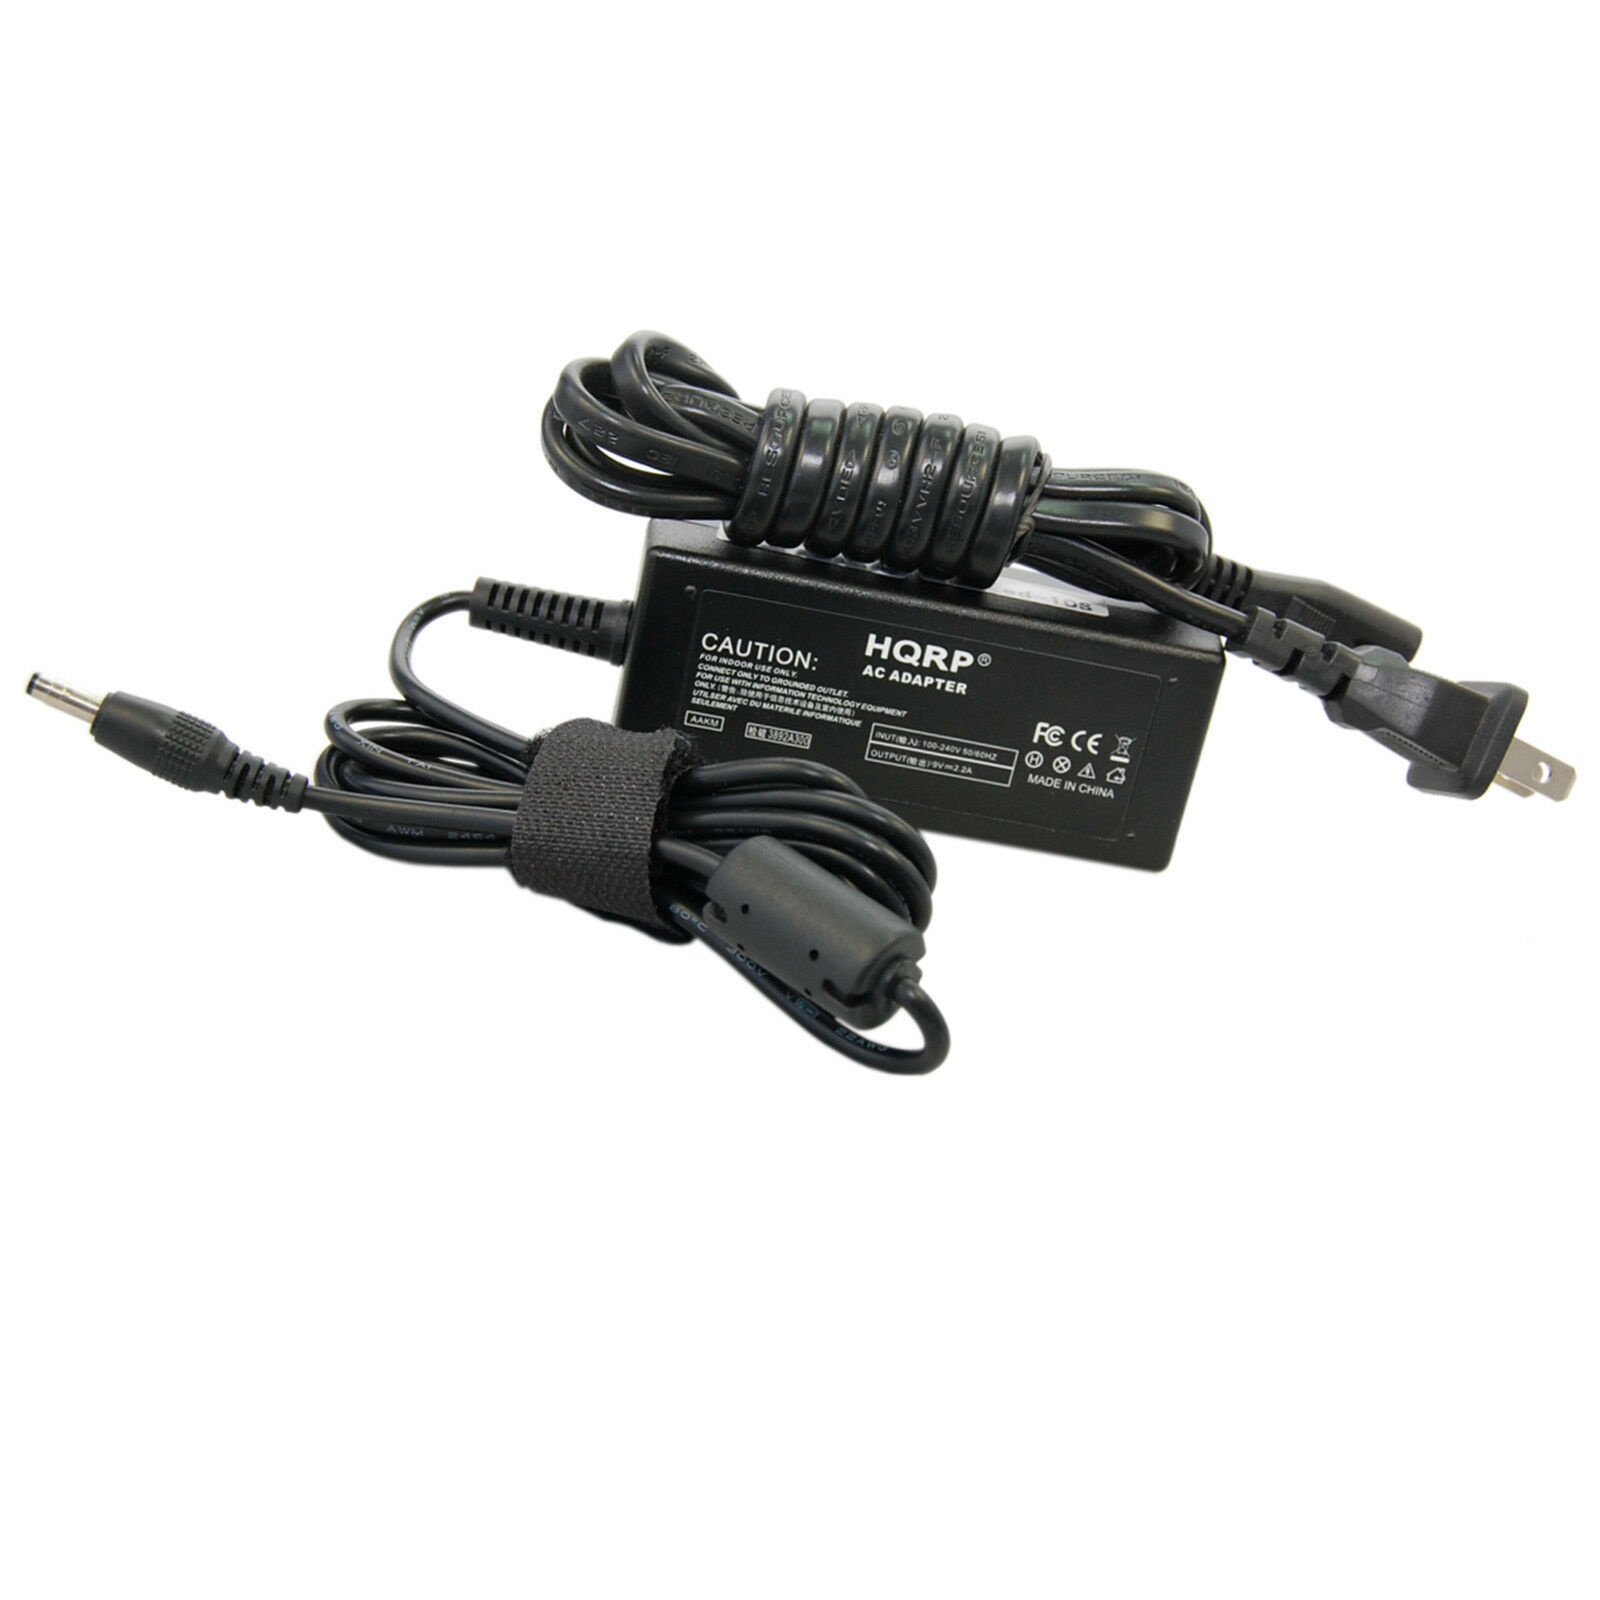 NEW 36V AC Adapter For Kodak All-In-One InkJet Printer Power Supply Cord Charger 1 AC input voltage ……100-240VAC (World - Click Image to Close